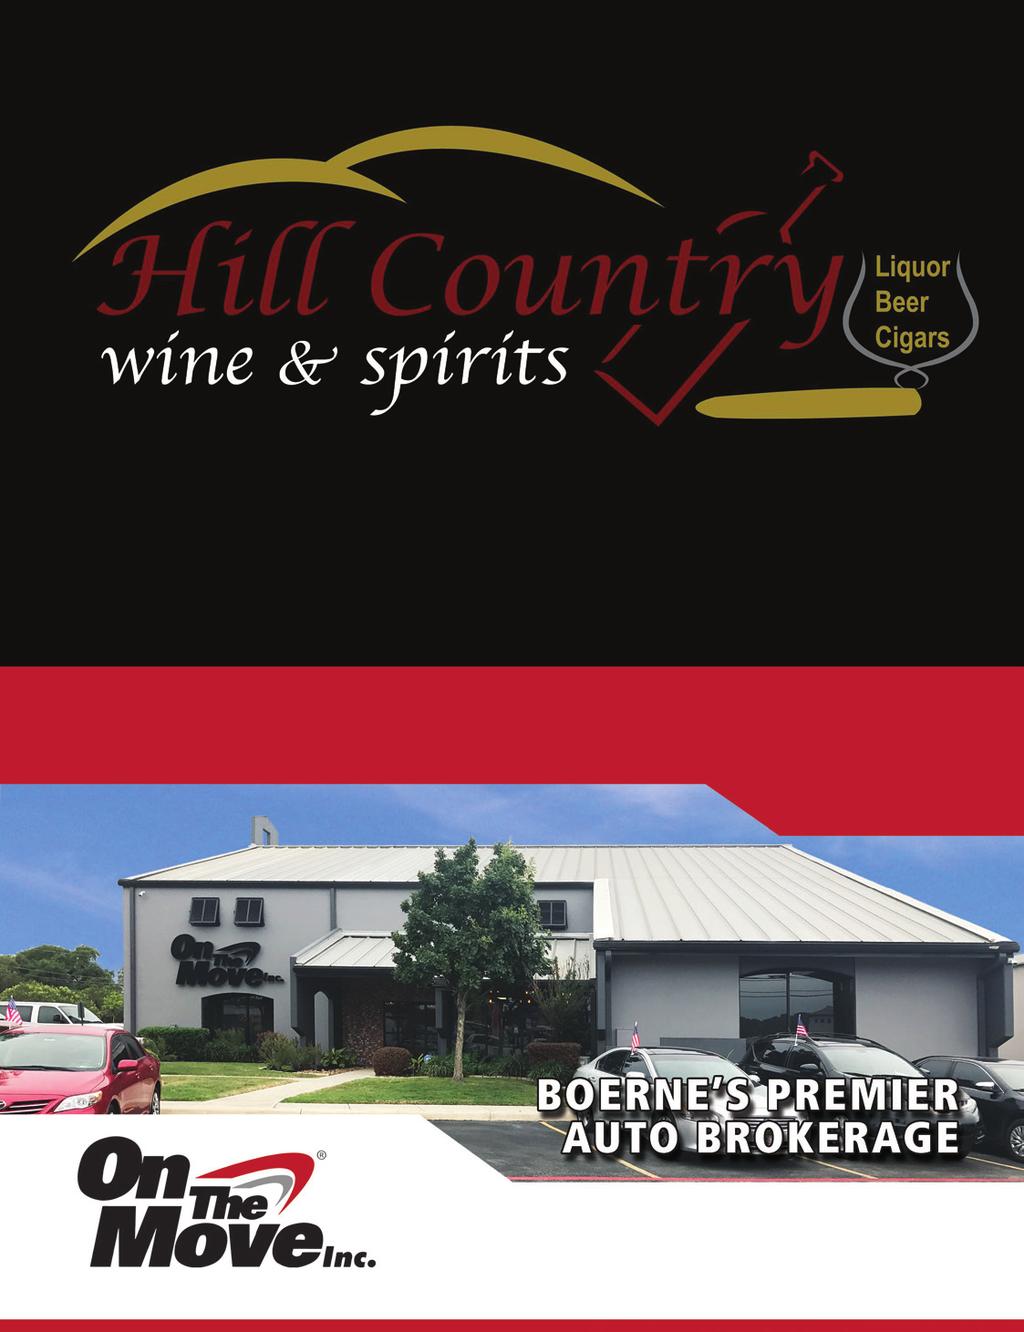 Why drive all over town We are just around the corner. Exit #546 Fair Oaks Parkway 28604 IH-10 W, Suite 1 Boerne, TX 78006 Best Wine selection in Fair Oaks Ranch! 830-755-6065 www.